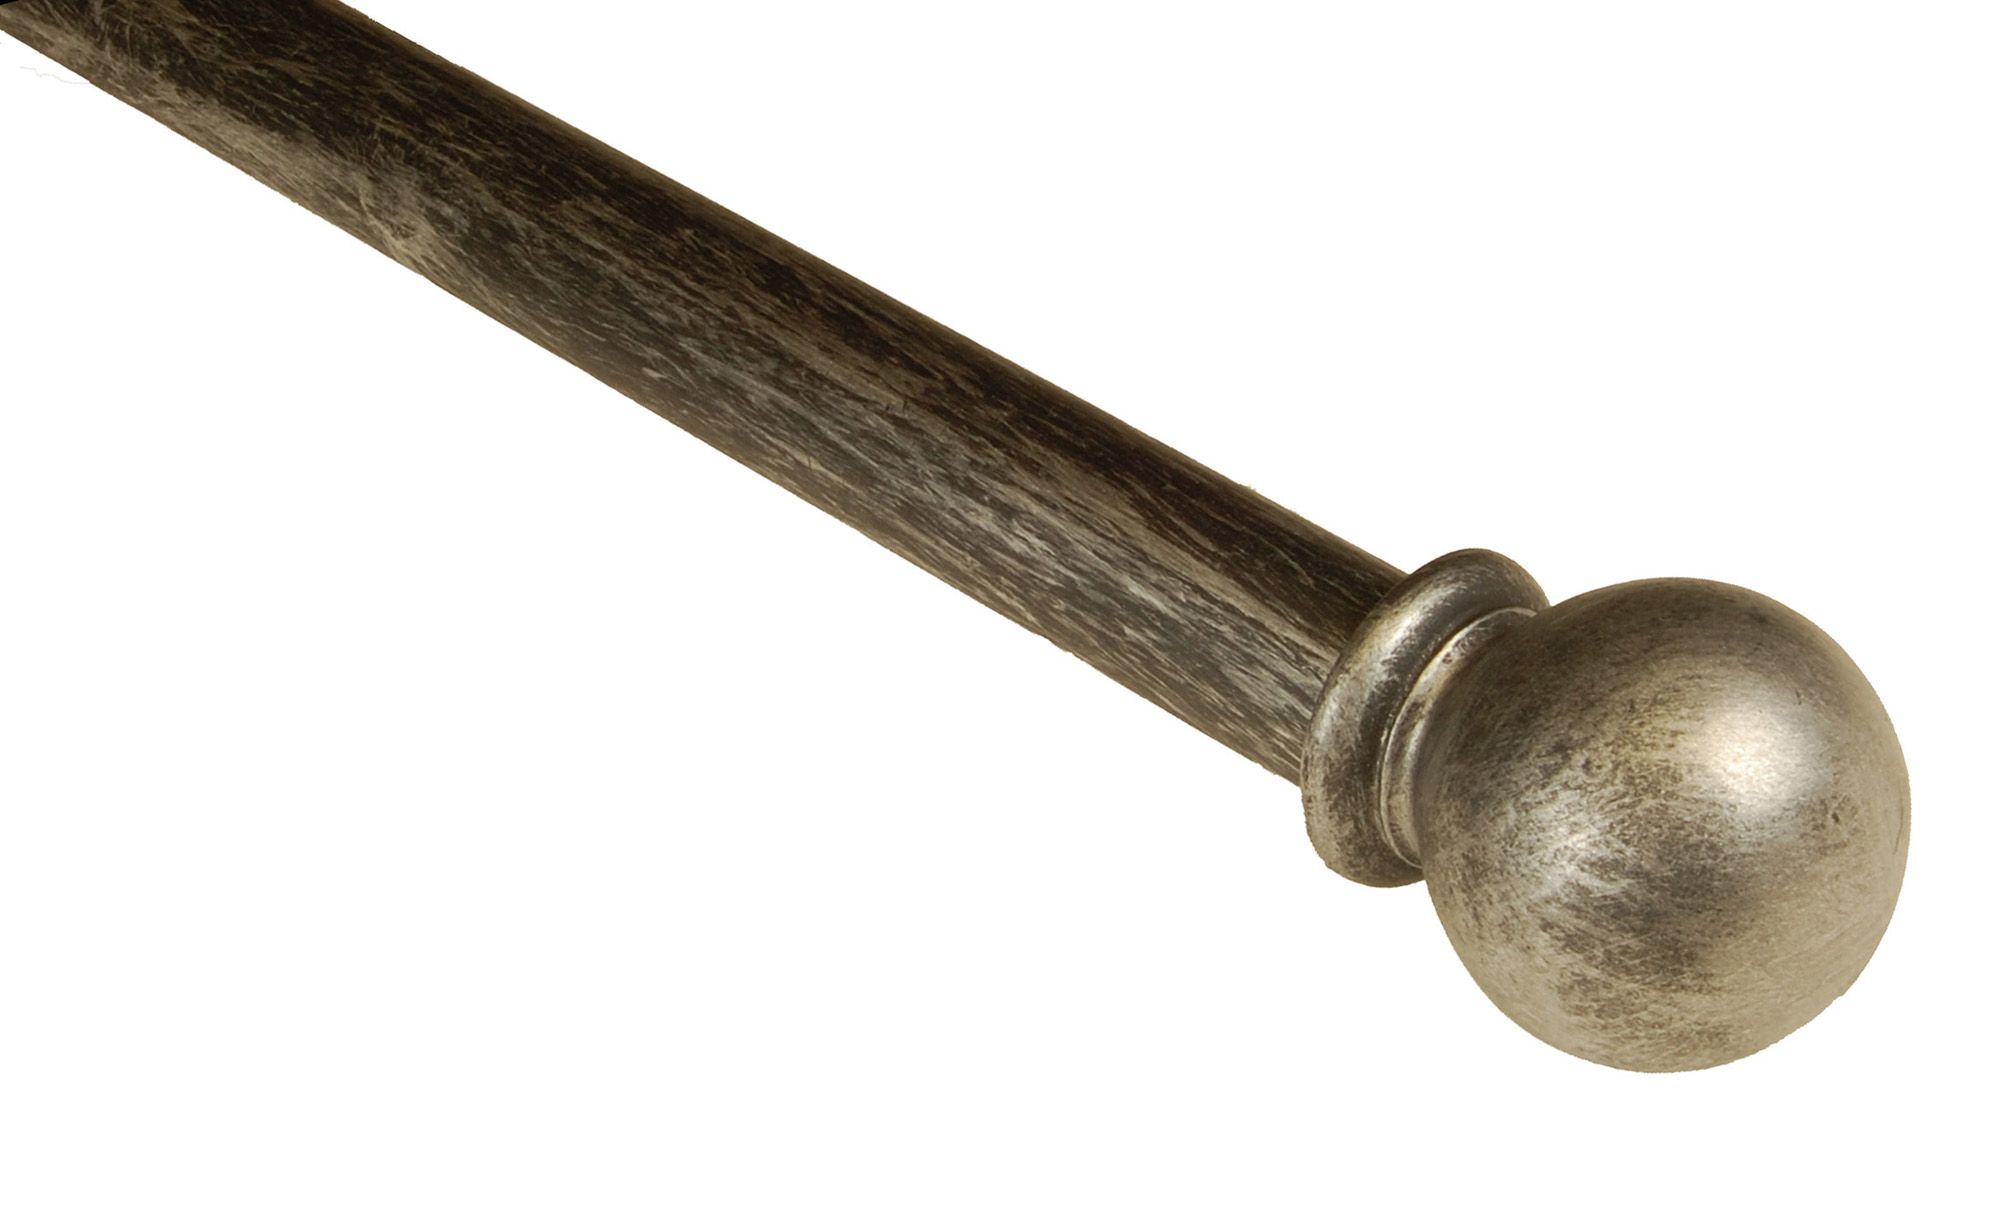 BCL Classic Ball Curtain Rod, Antique Silver Finish, 28-inch to 48-inch, 1.25-inch Diameter Pole